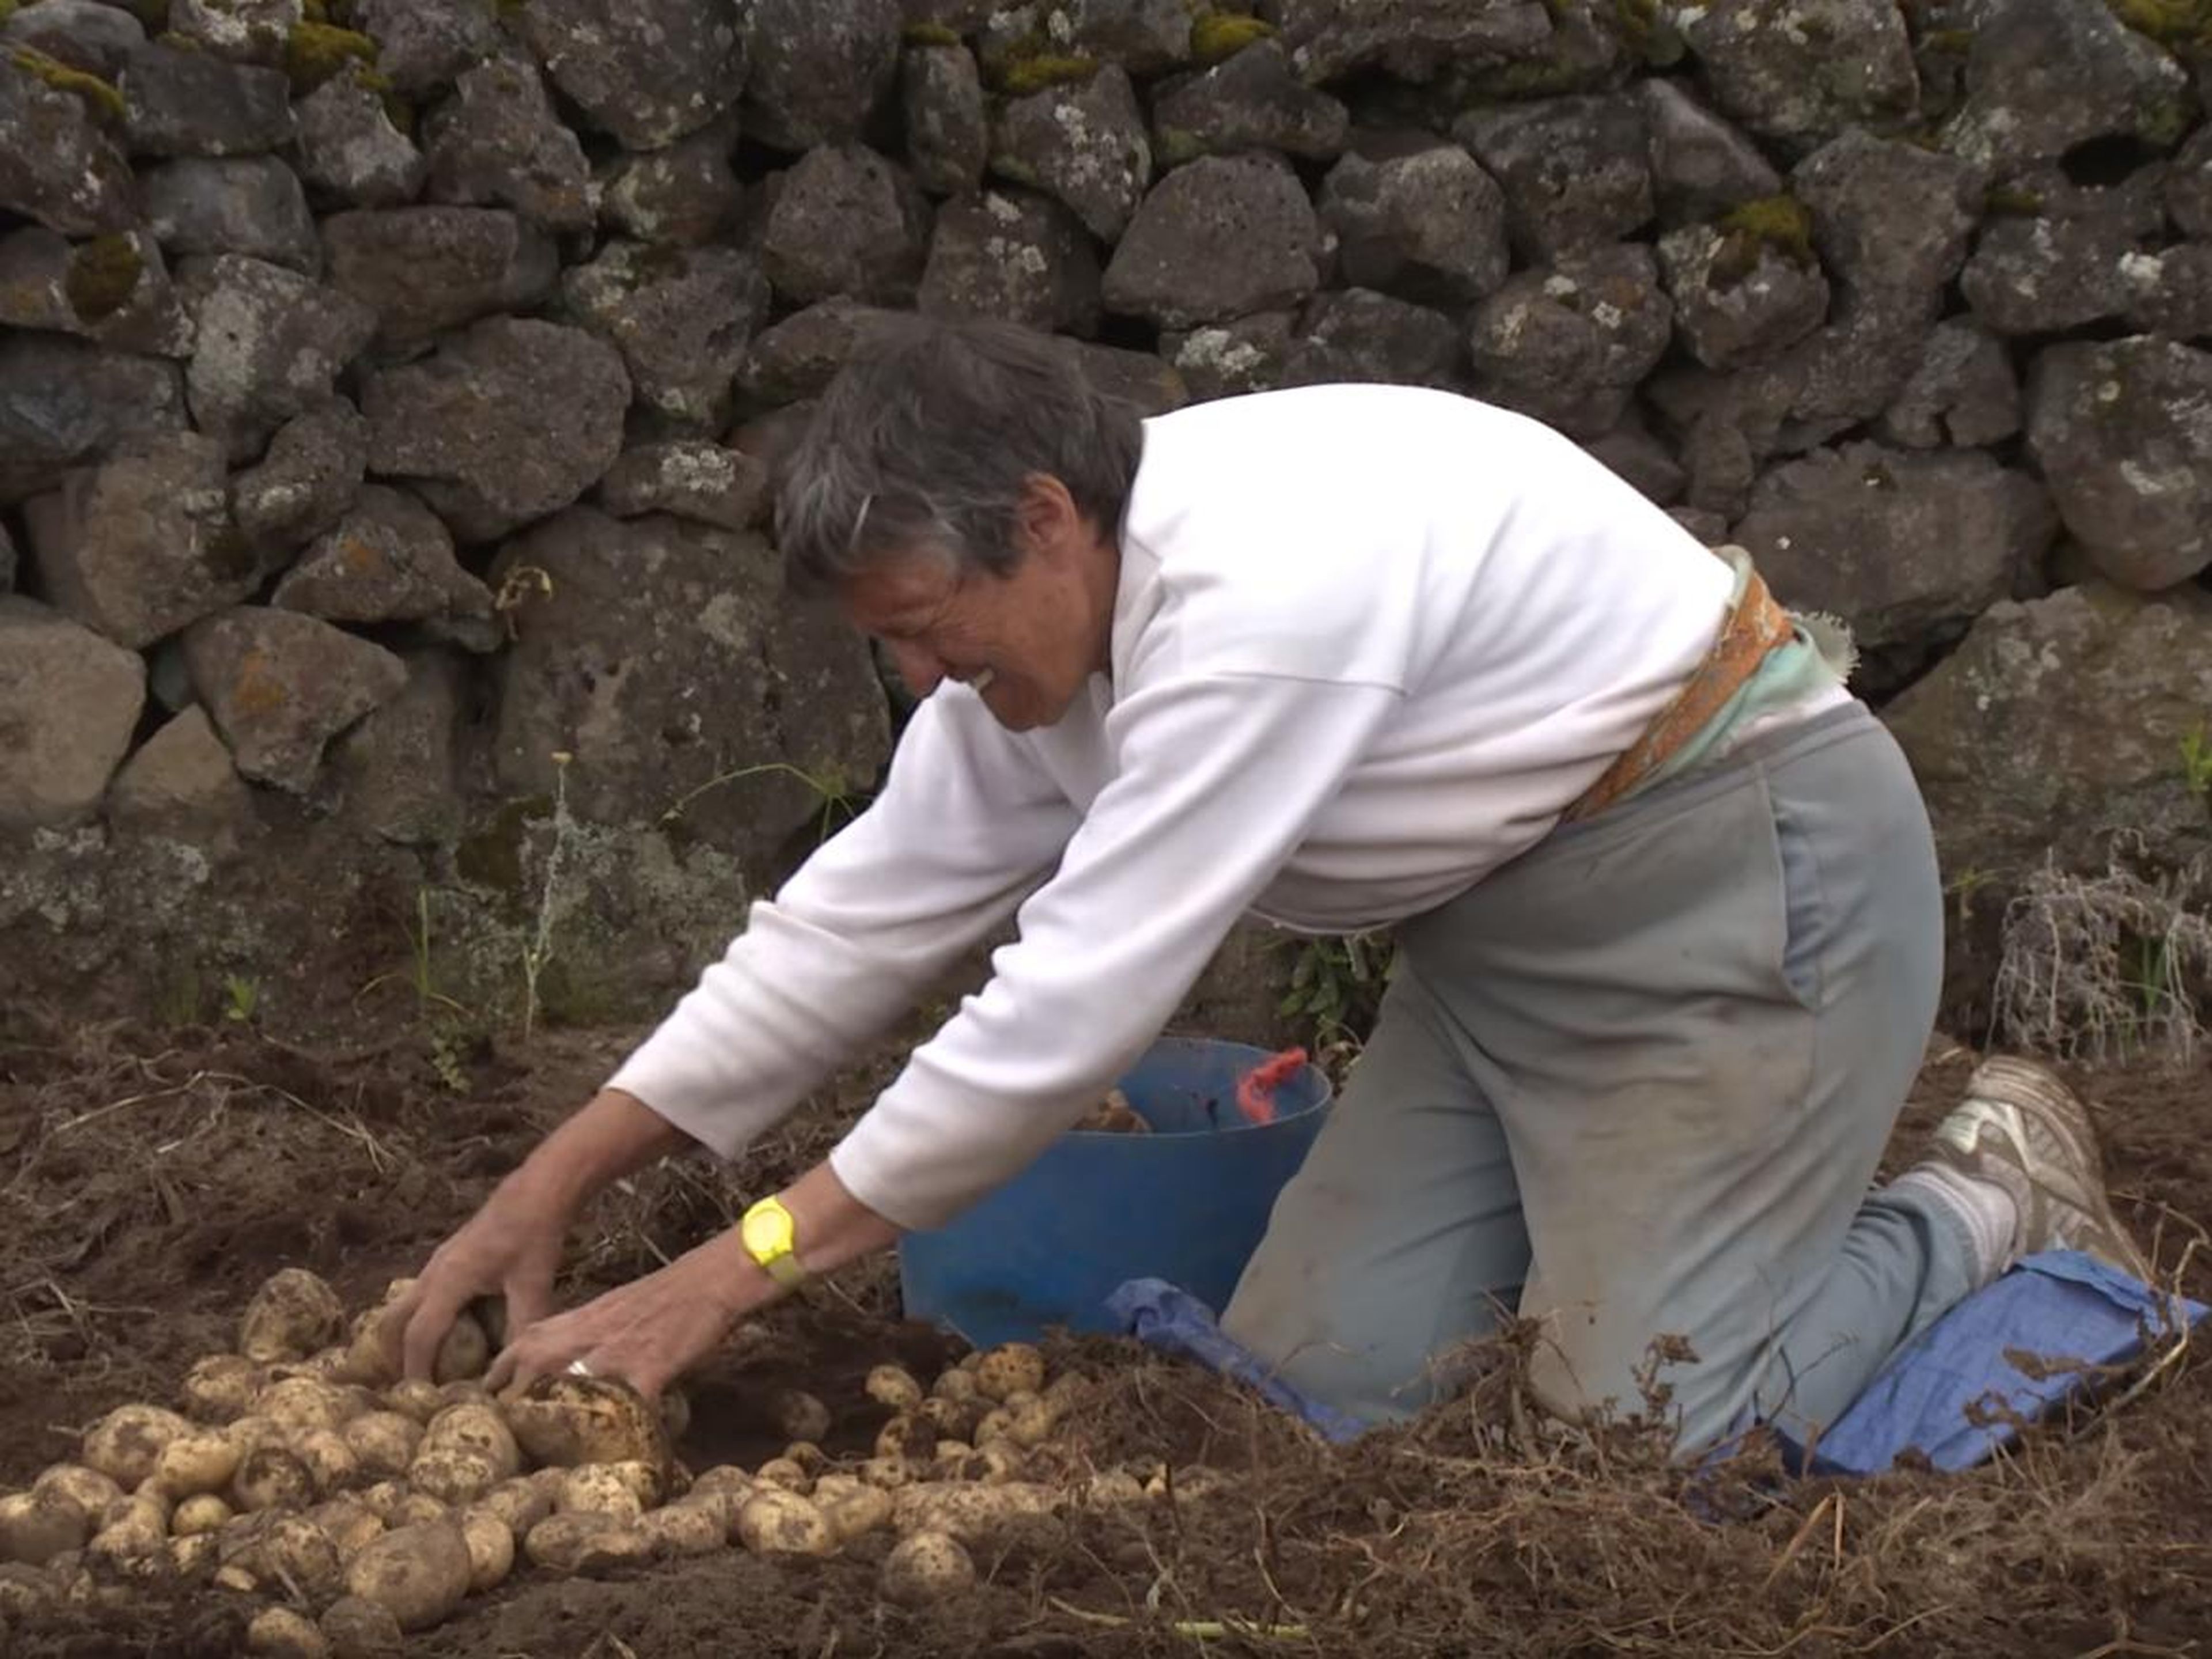 The farming part of life in Tristan allows islanders to grow their own food without having to import.